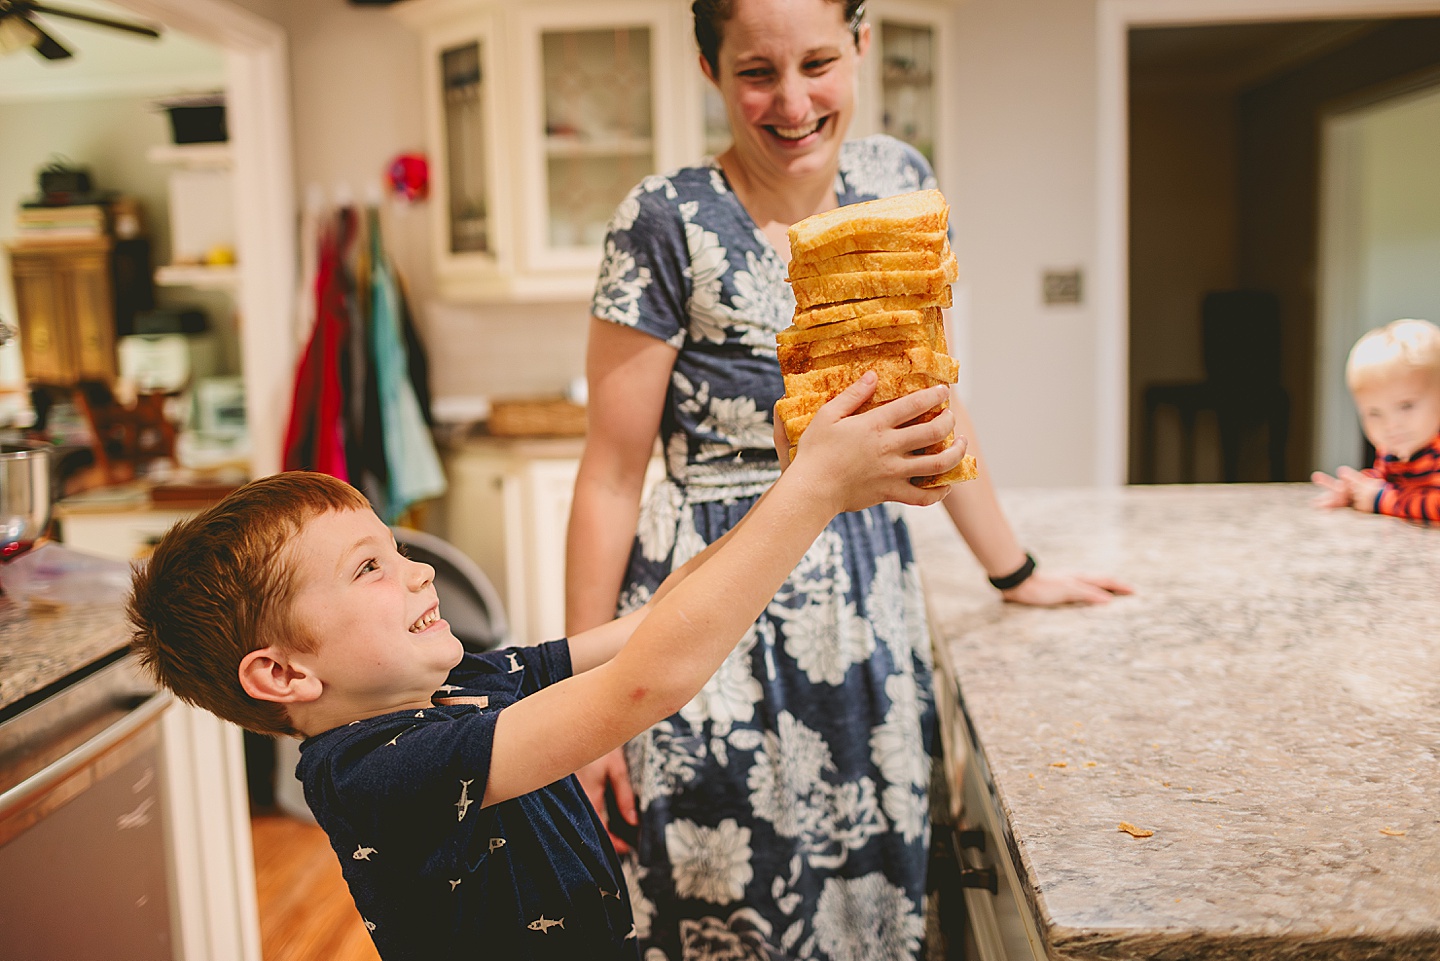 Kid holding up lots of bread